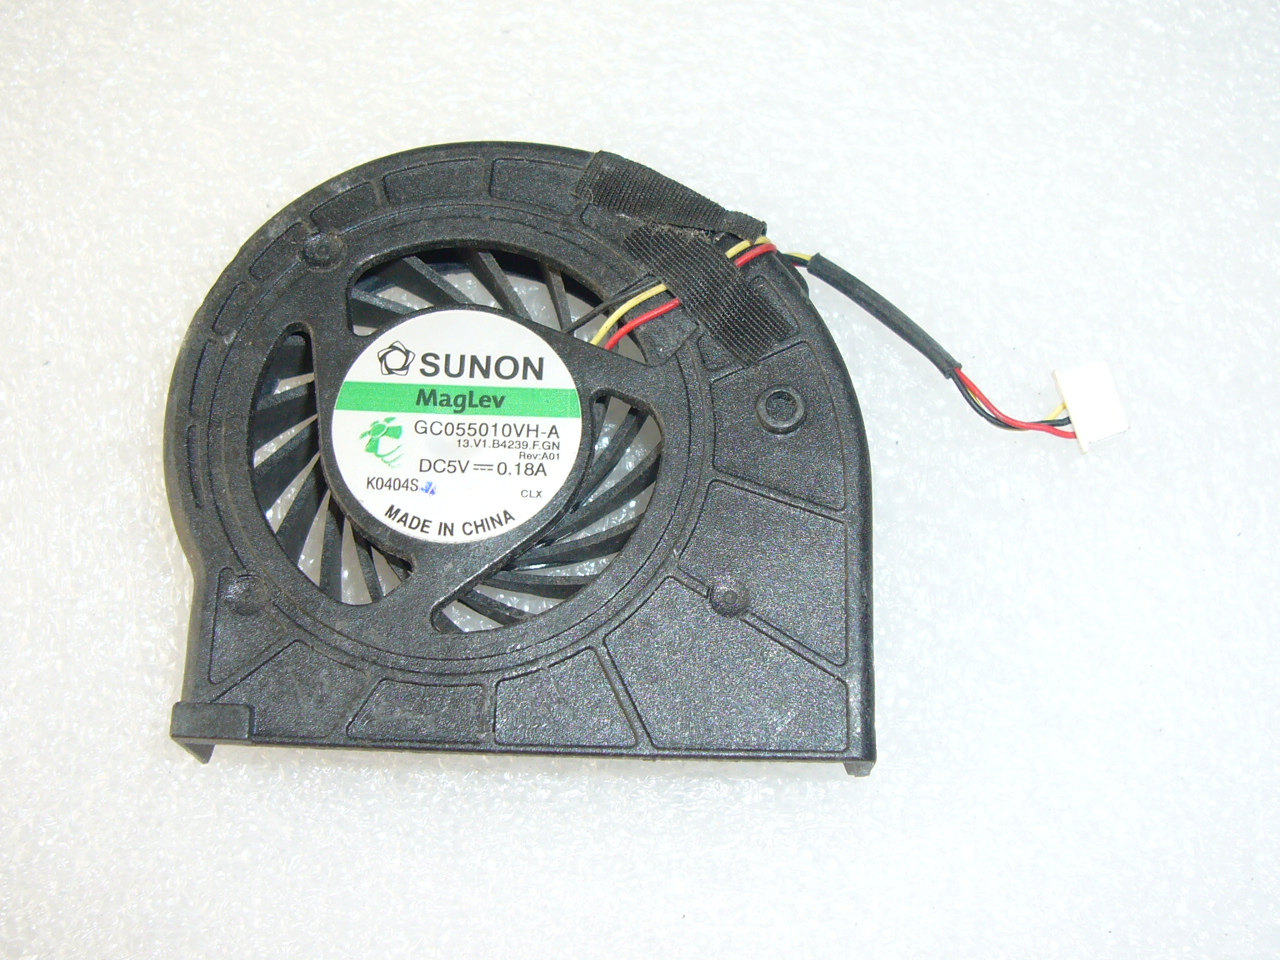 Lenovo Thinkpad X201 Tablet GC055010VH-A 13.V1.B4239.F.GN 3Wire 4Pin Series Cooling Fan